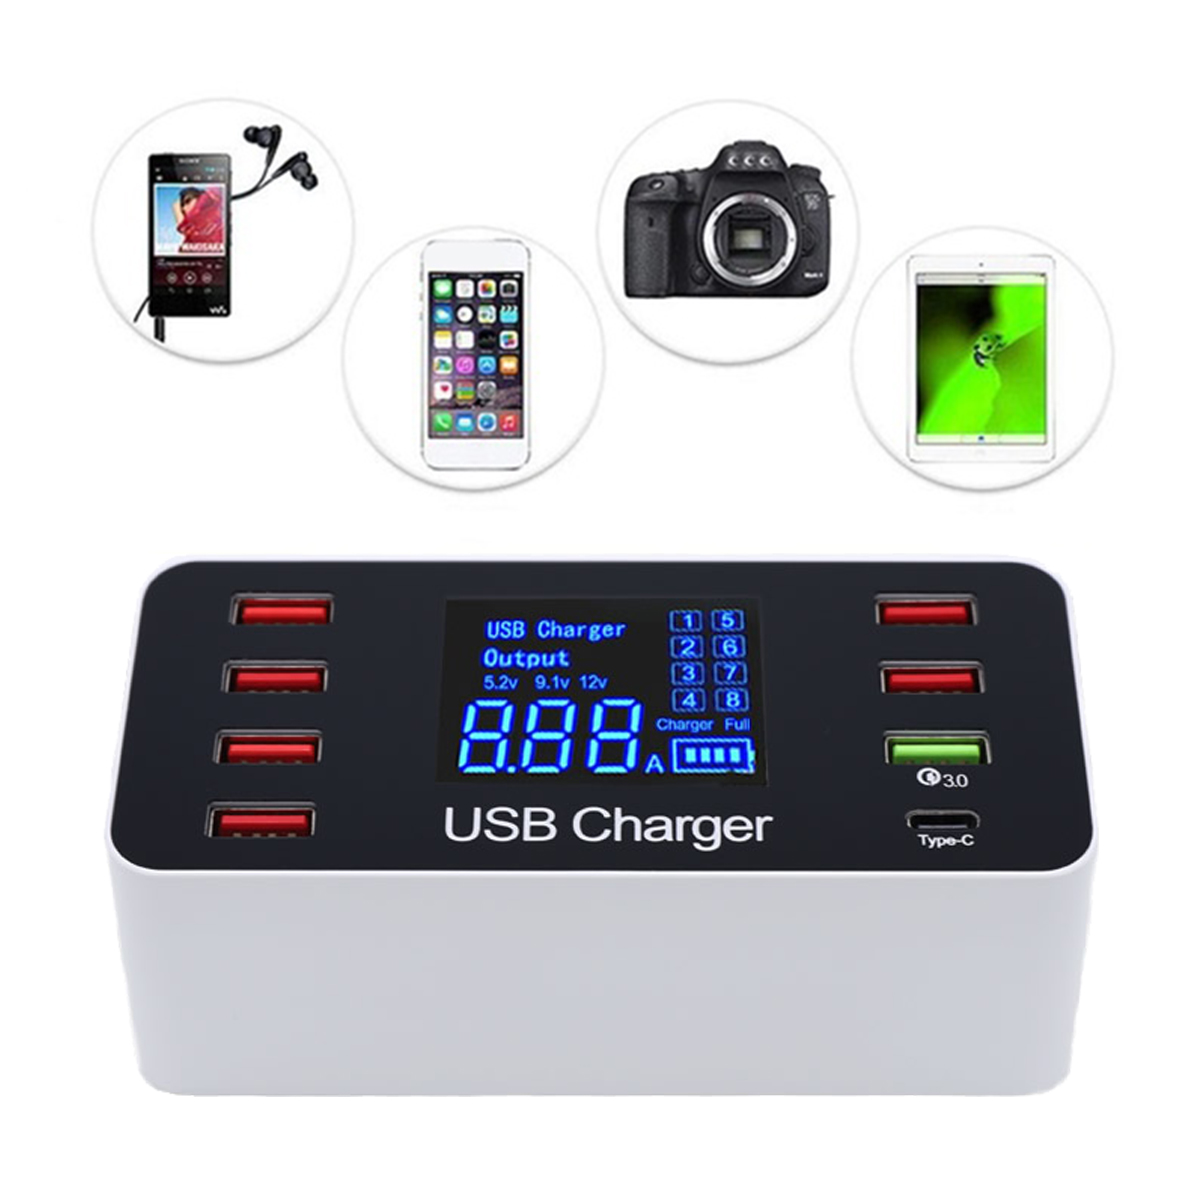 5V8A-Multiple-USB-Charger-Adapter-Desktop-Charging-Station-Hub-Type-C-Quick-Charge-30-Multi-Port-LCD-1606214-2